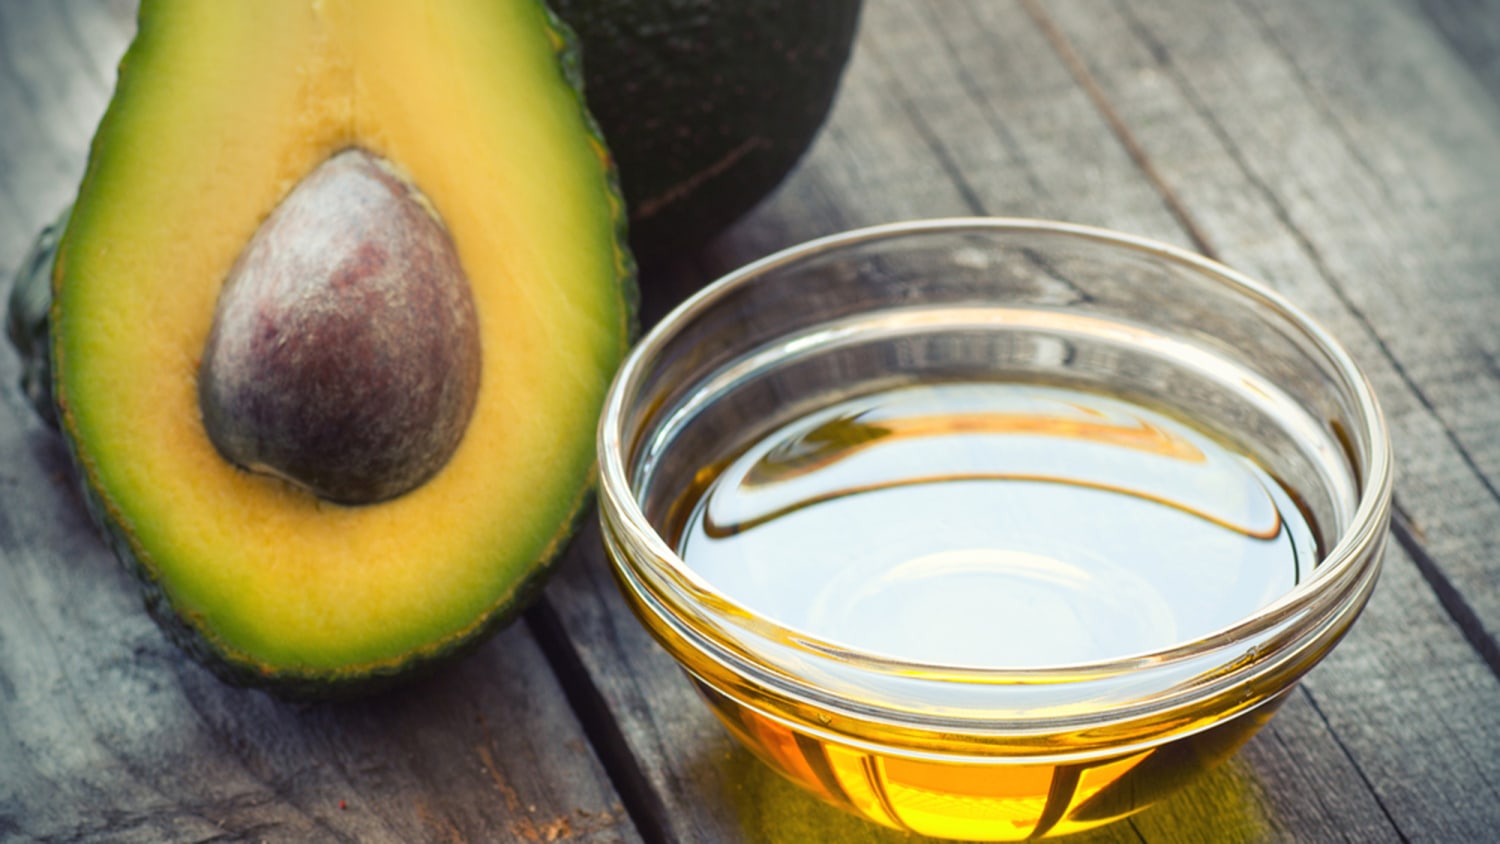 Avocado oil is the new coconut oil—but how do you use it?